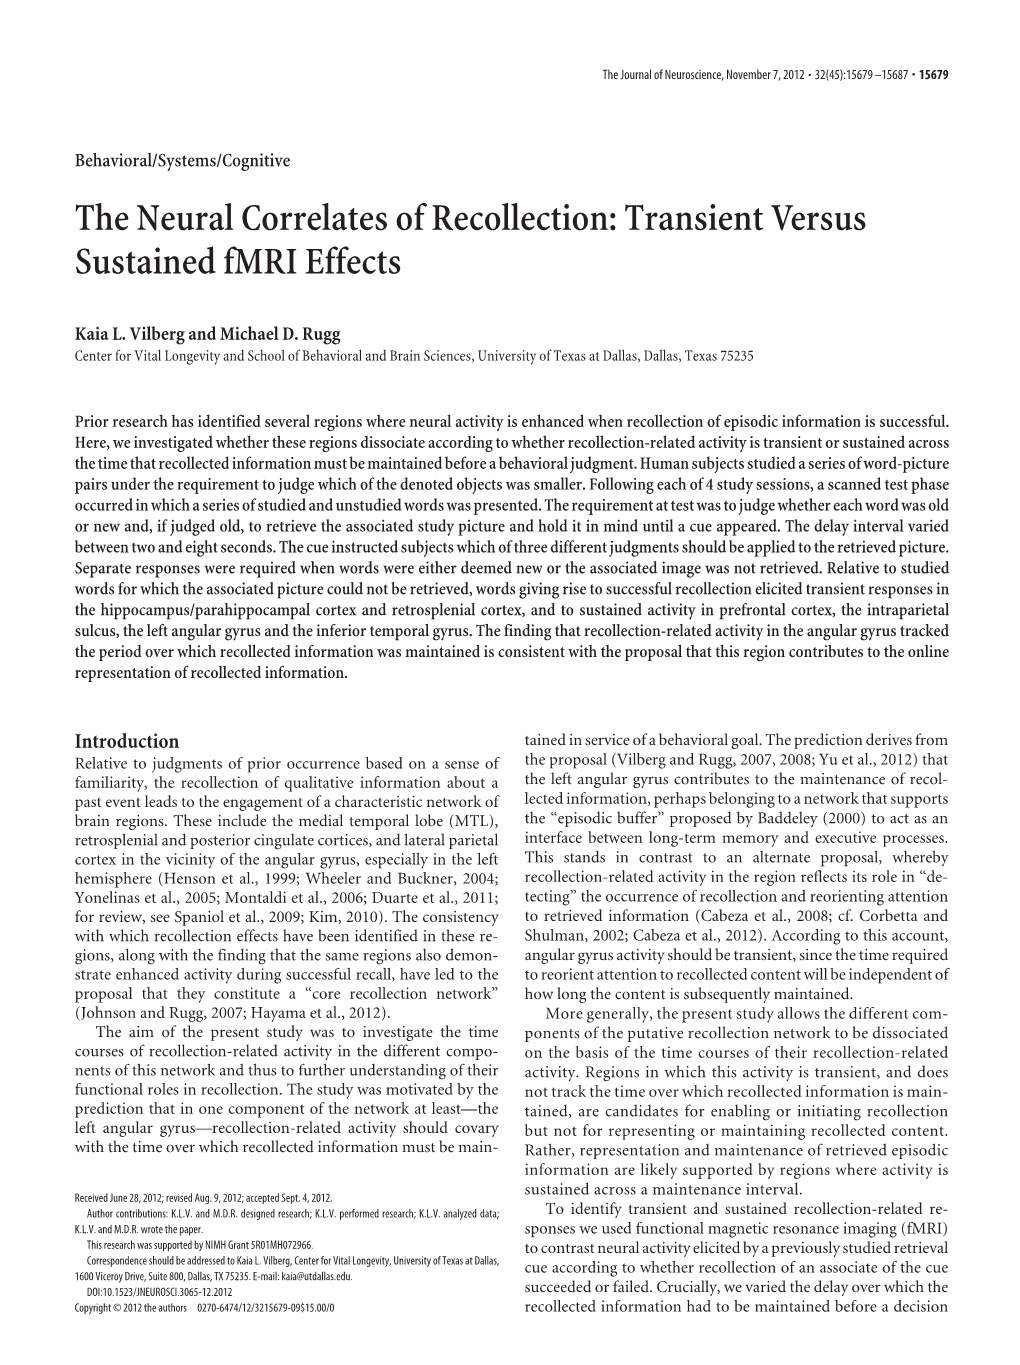 The Neural Correlates of Recollection: Transient Versus Sustained Fmri Effects